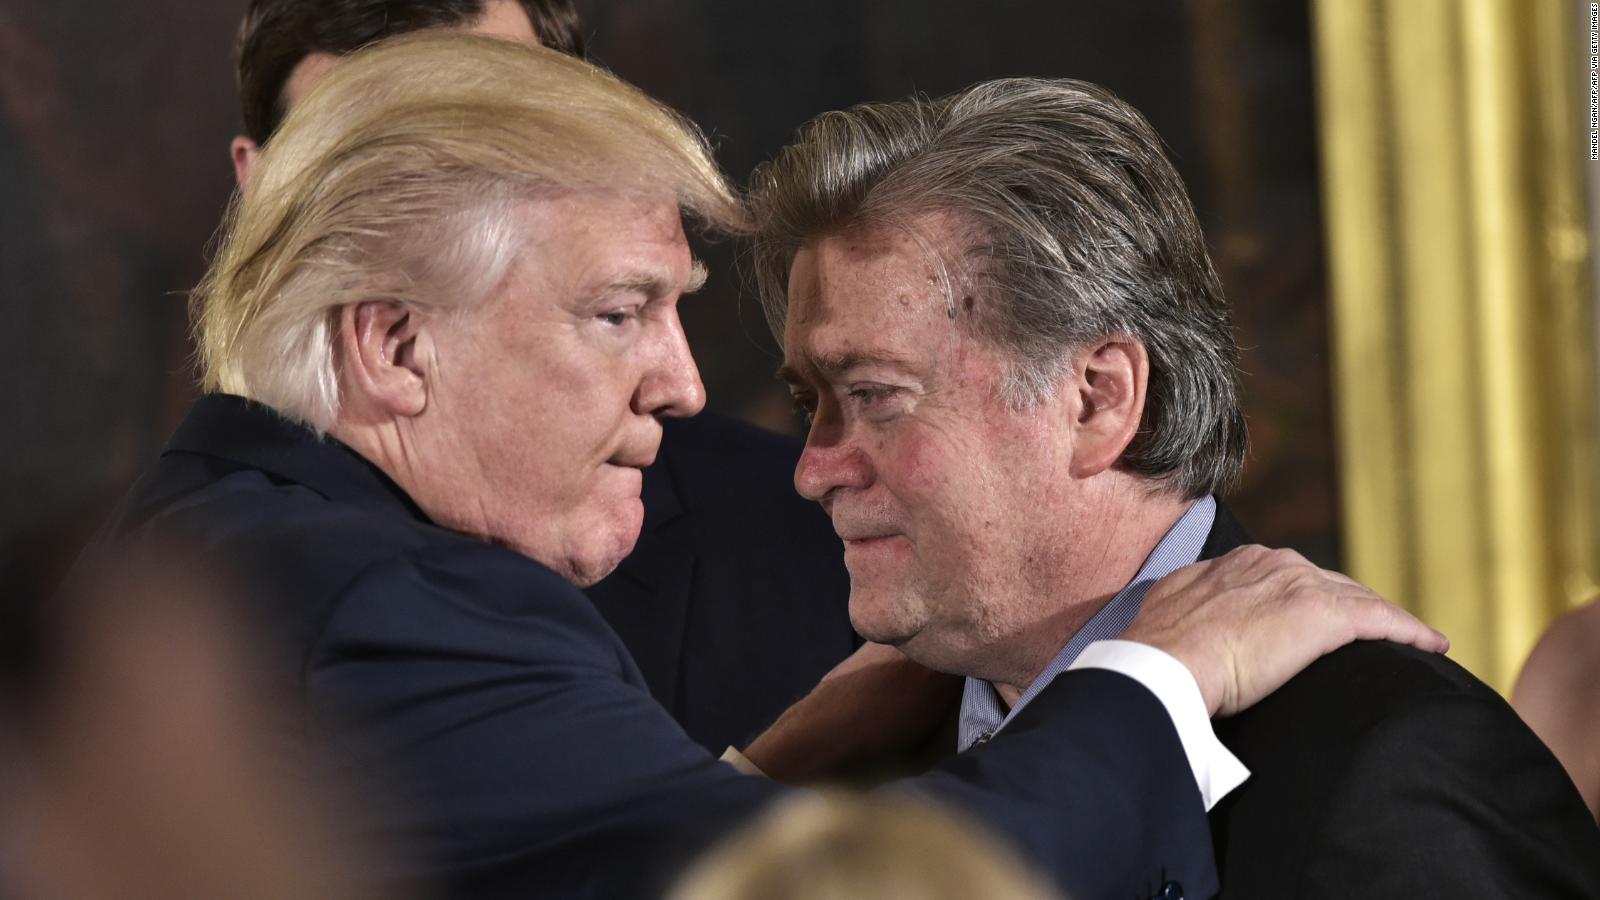 Trump Reacts To The Arrest Of His Former Aide Steve Bannon